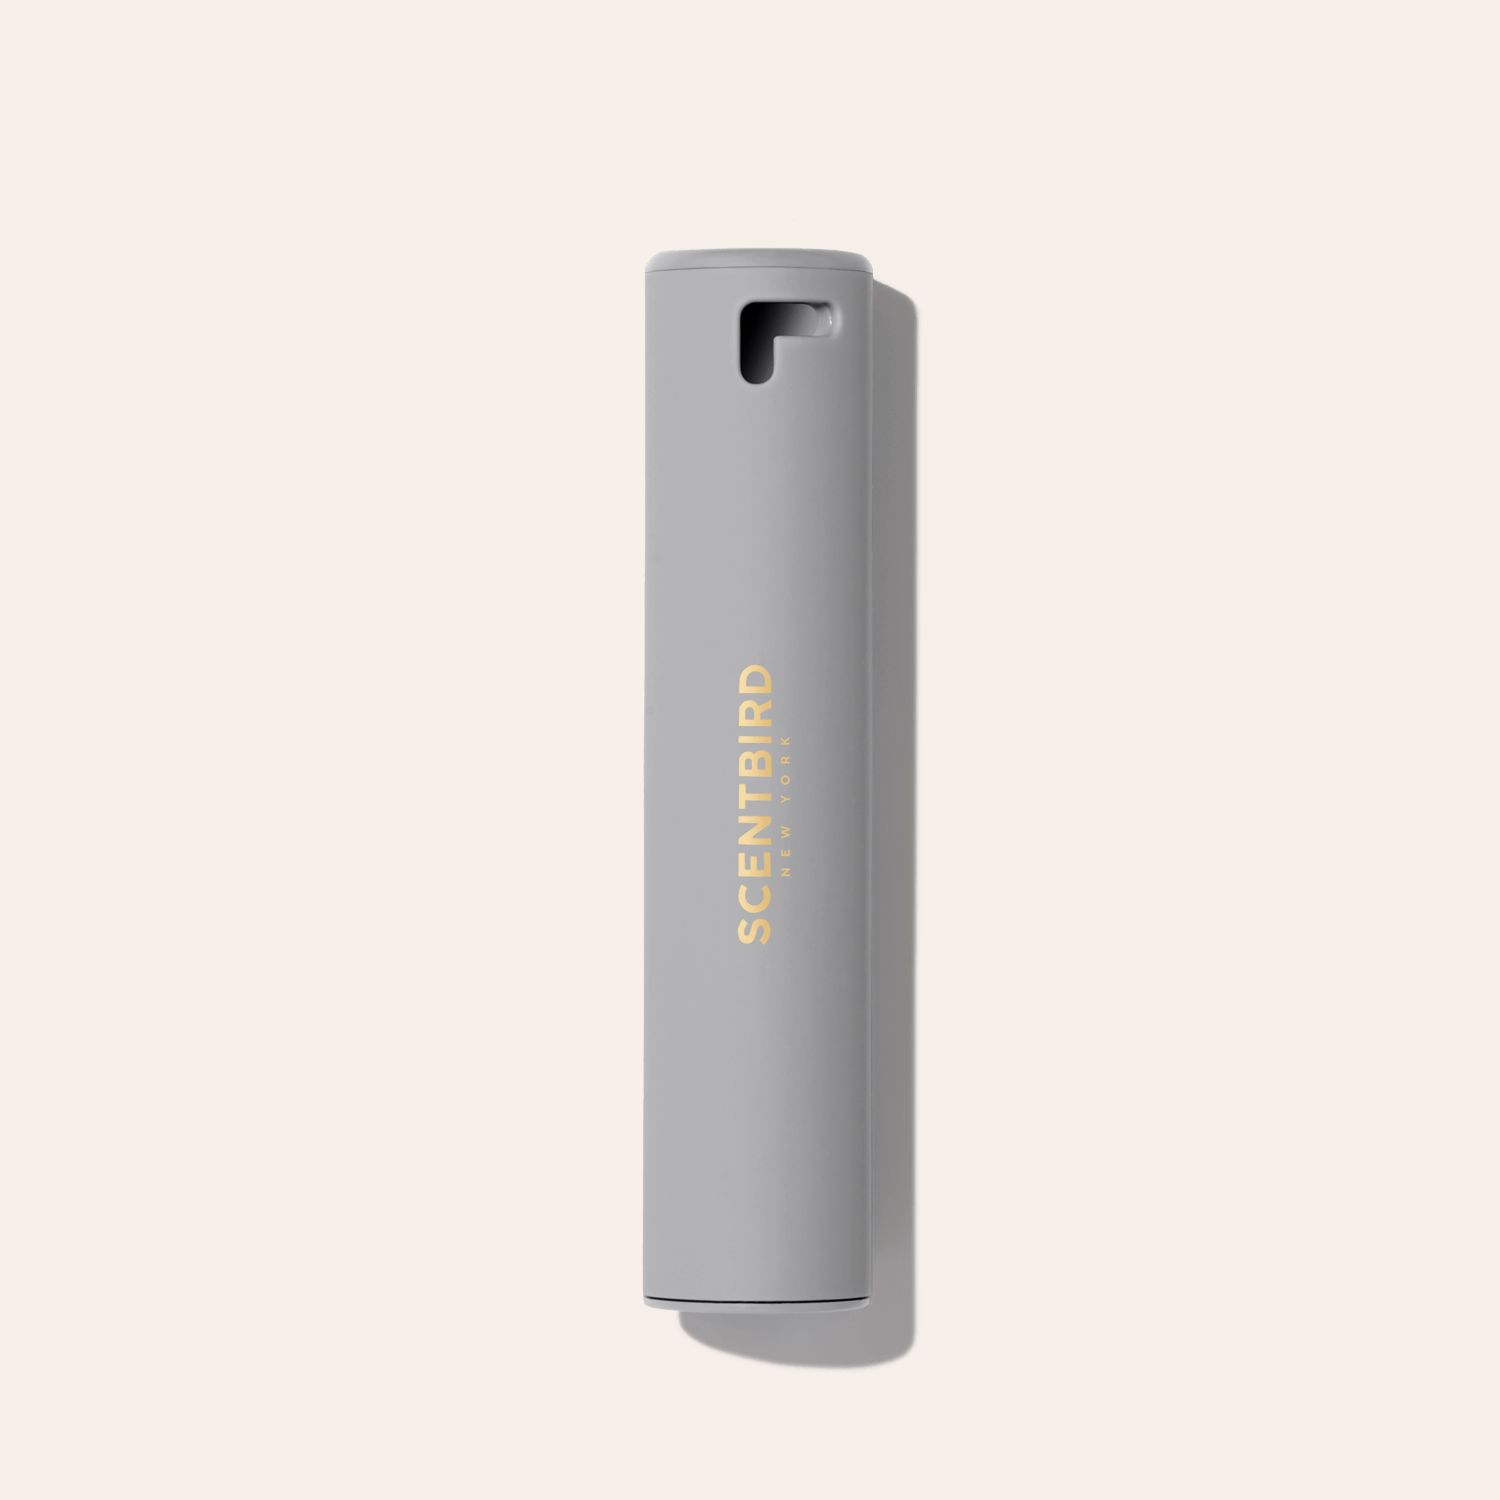 Scentbird The Ultimate Luxury Perfume Box for $65.00